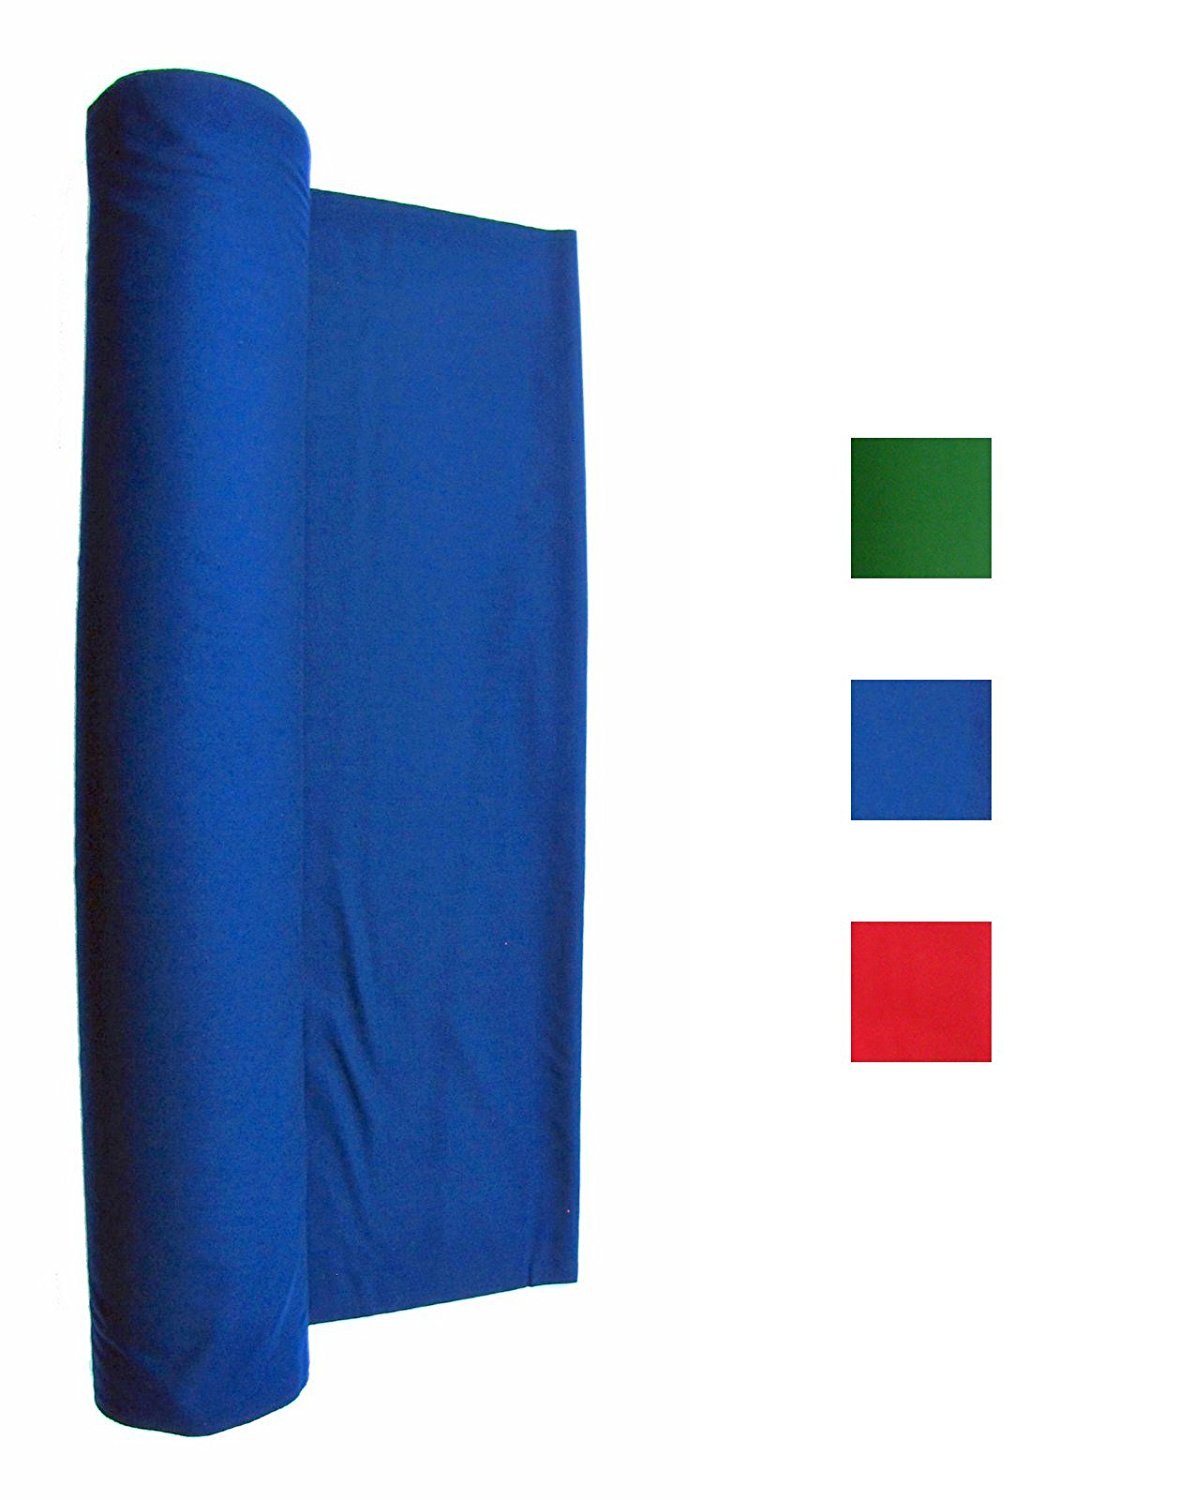 Cotton Backed Performance Grade Pool Table Felt - Billiard Cloth - For 7, 8 or 9 Foot Table English Green, Blue or Red